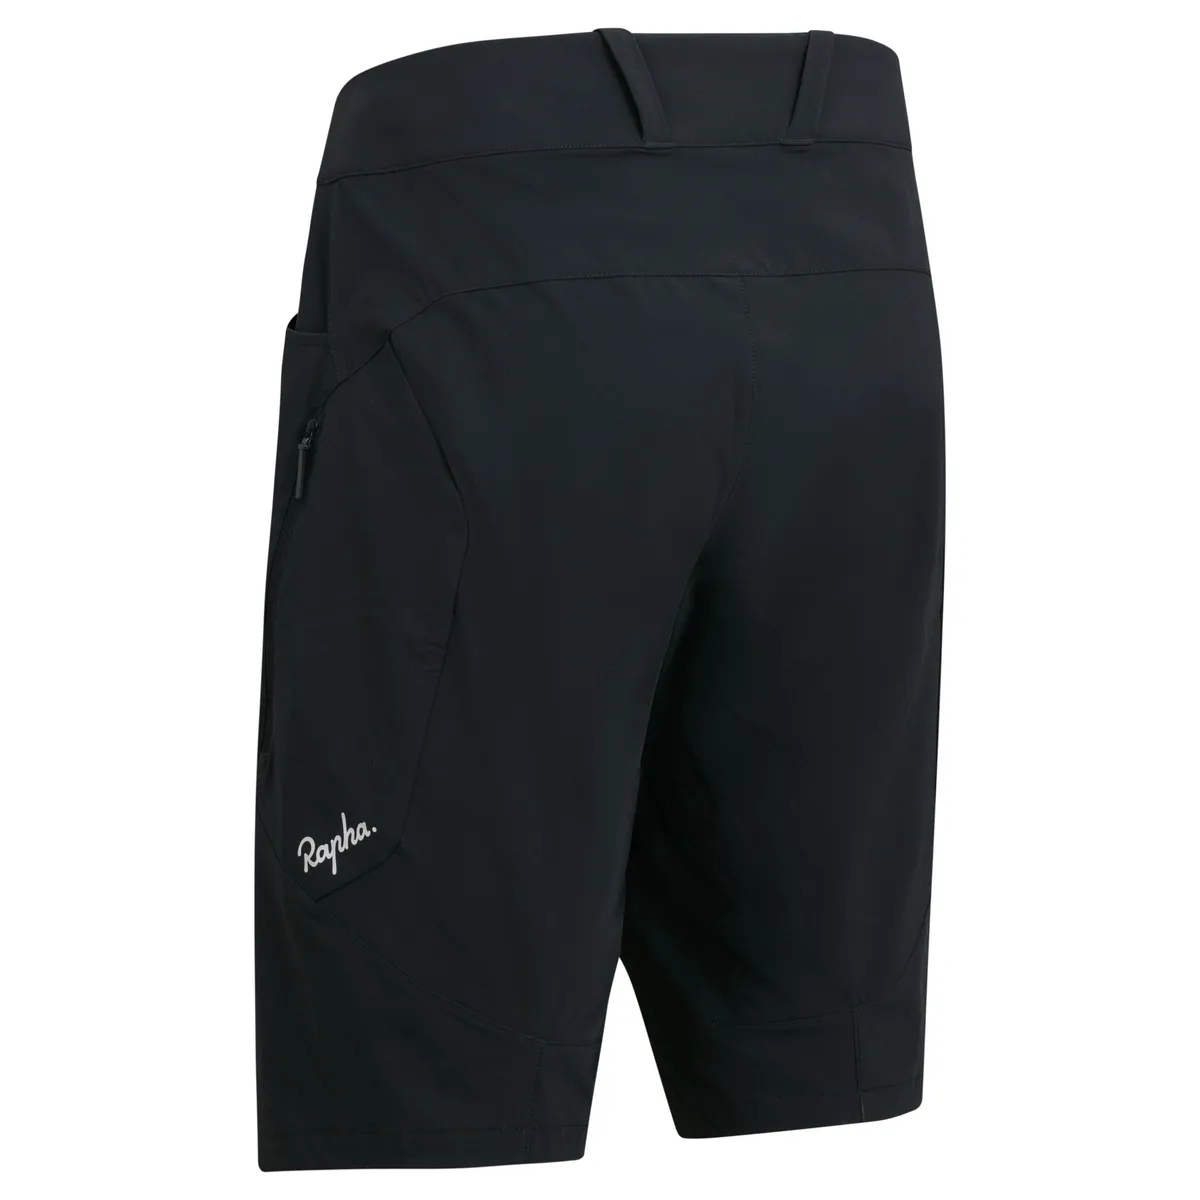 Rapha Trail Shorts in Anthracite, Micro Chip